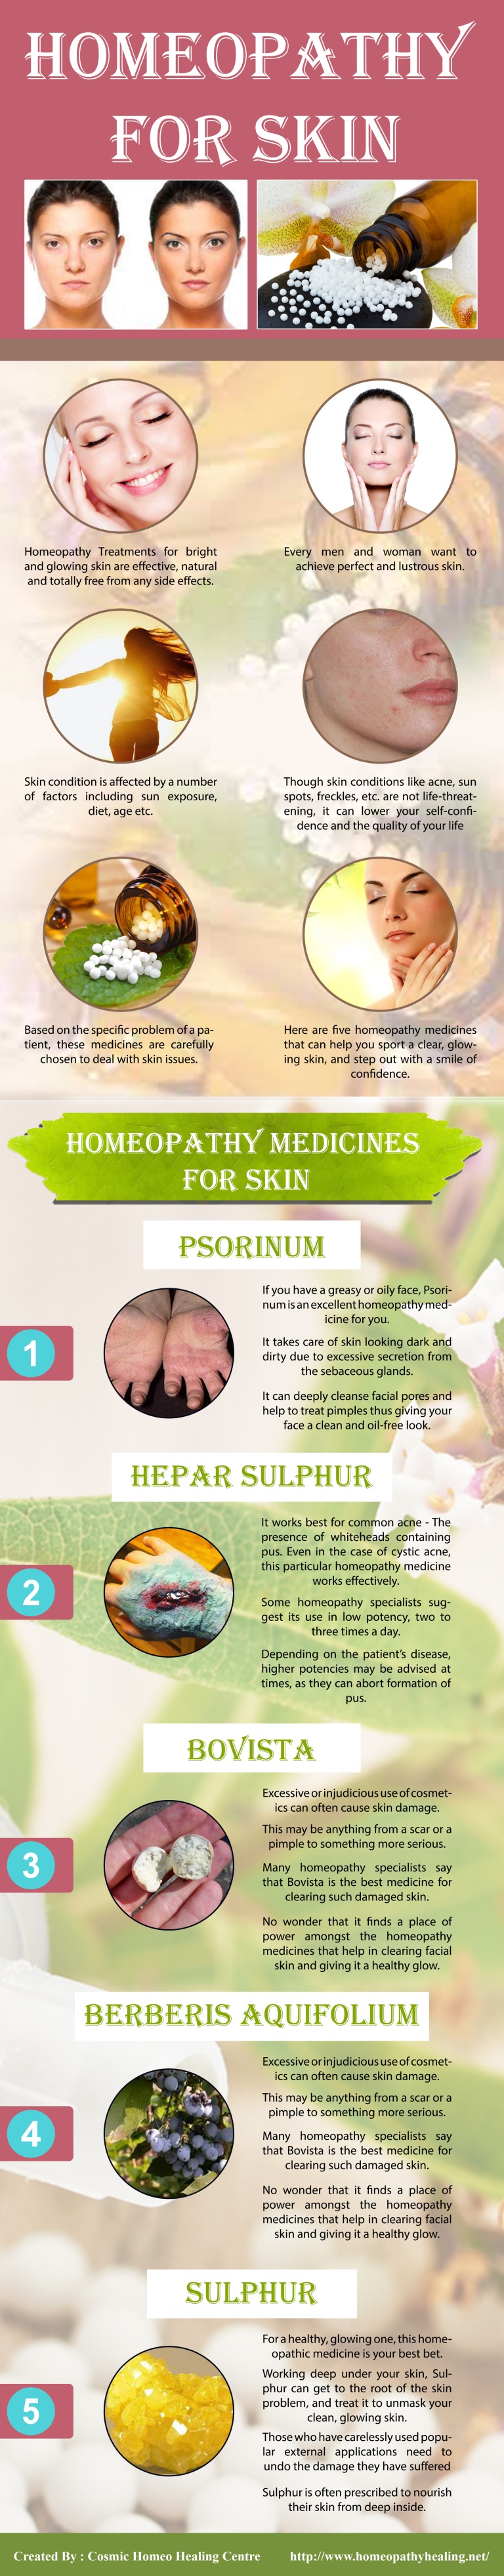 Homeopathy Medicines for Skin